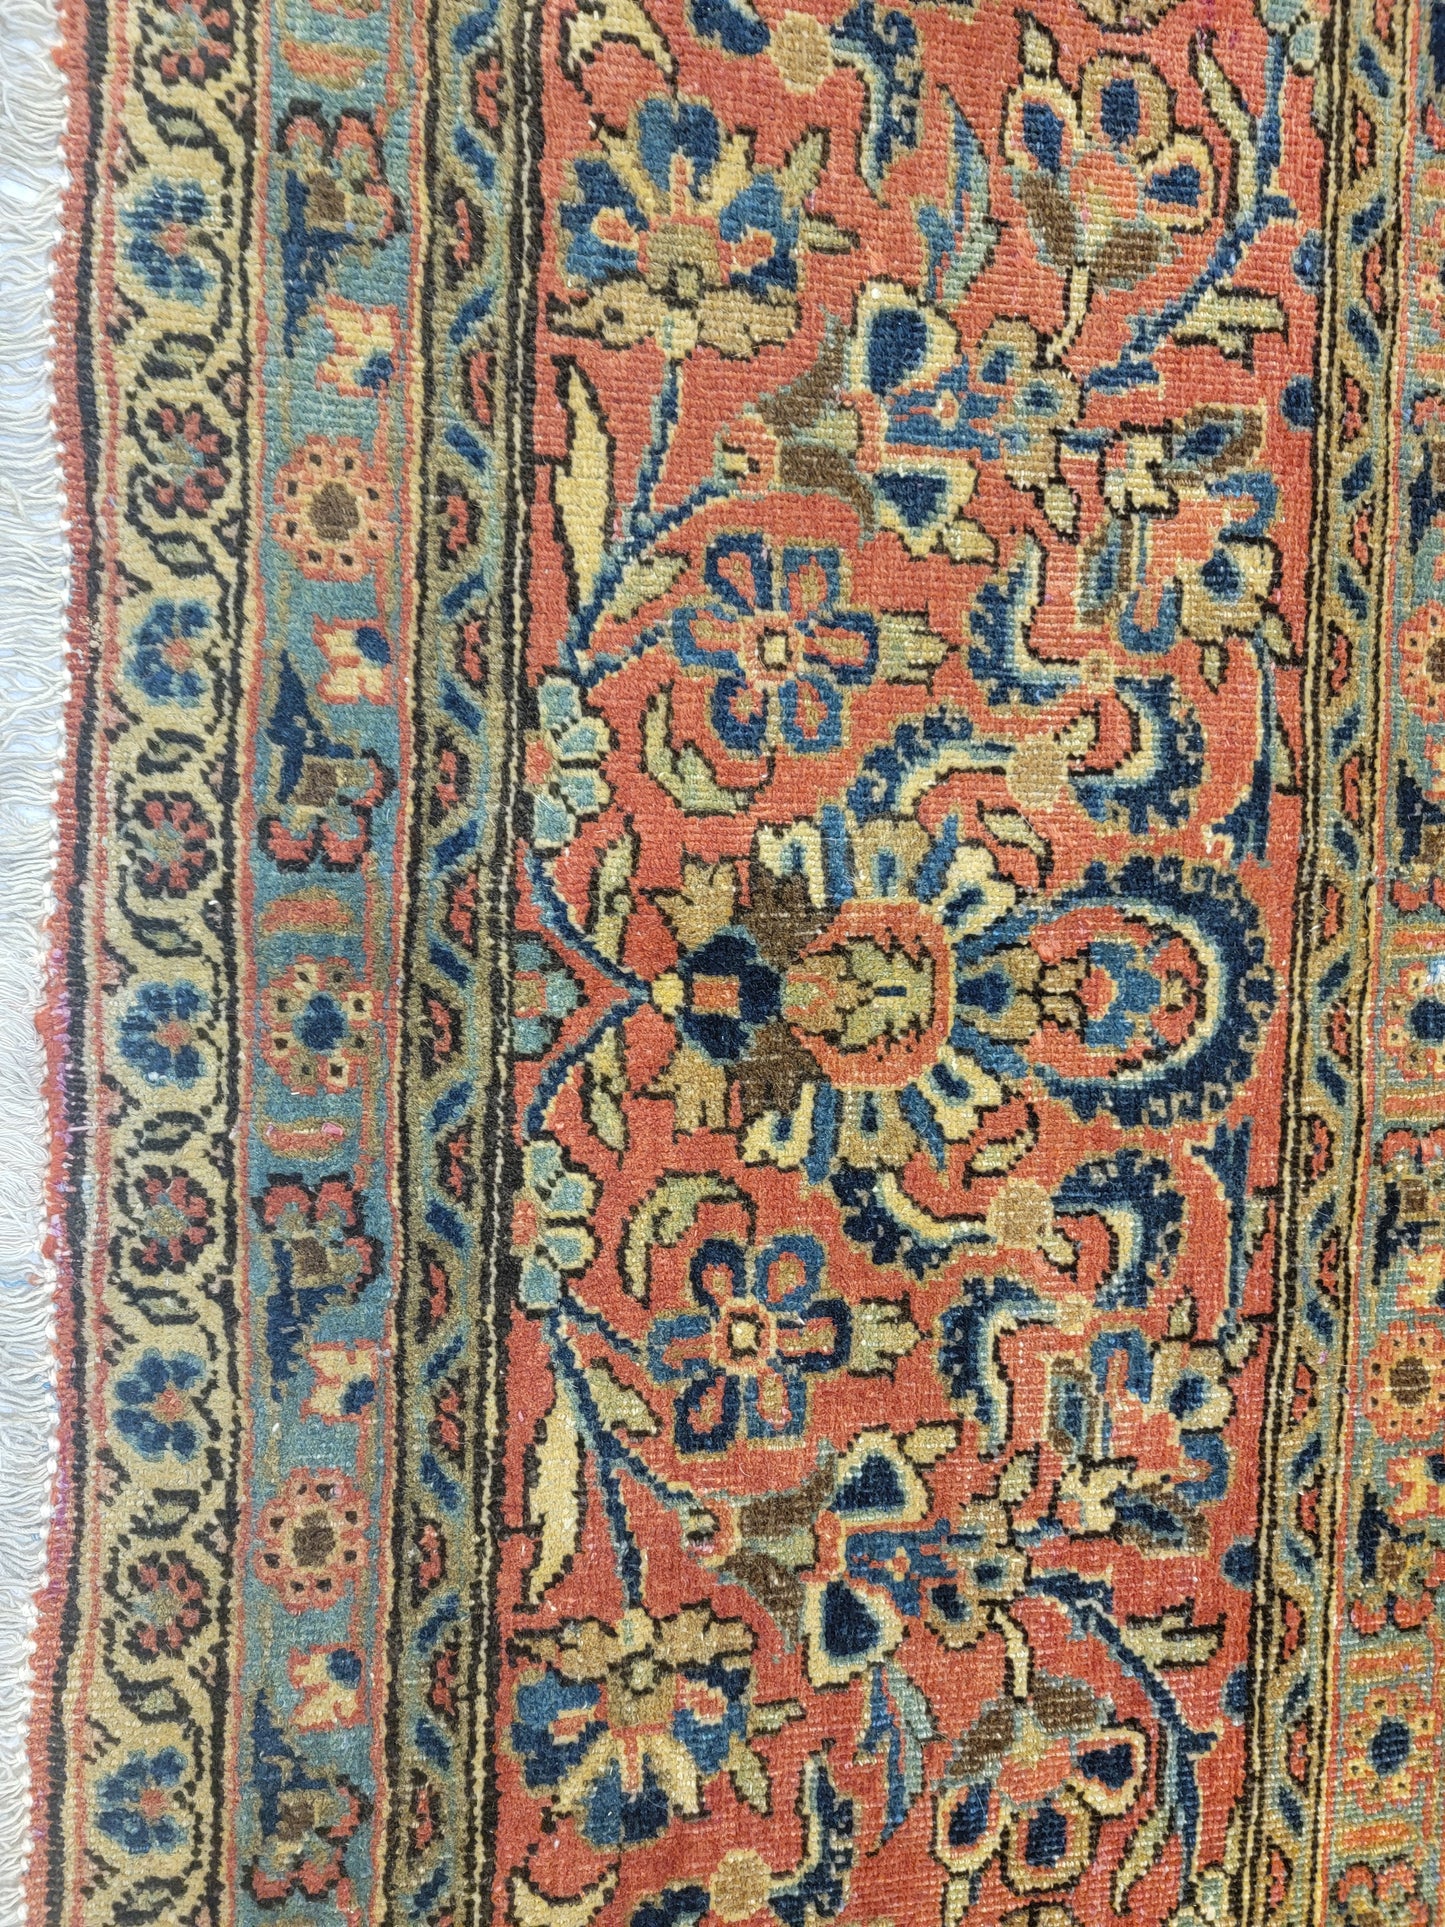 Antique Hand-Knotted Wool Area Rug Kashan 8'4" x 11'7"